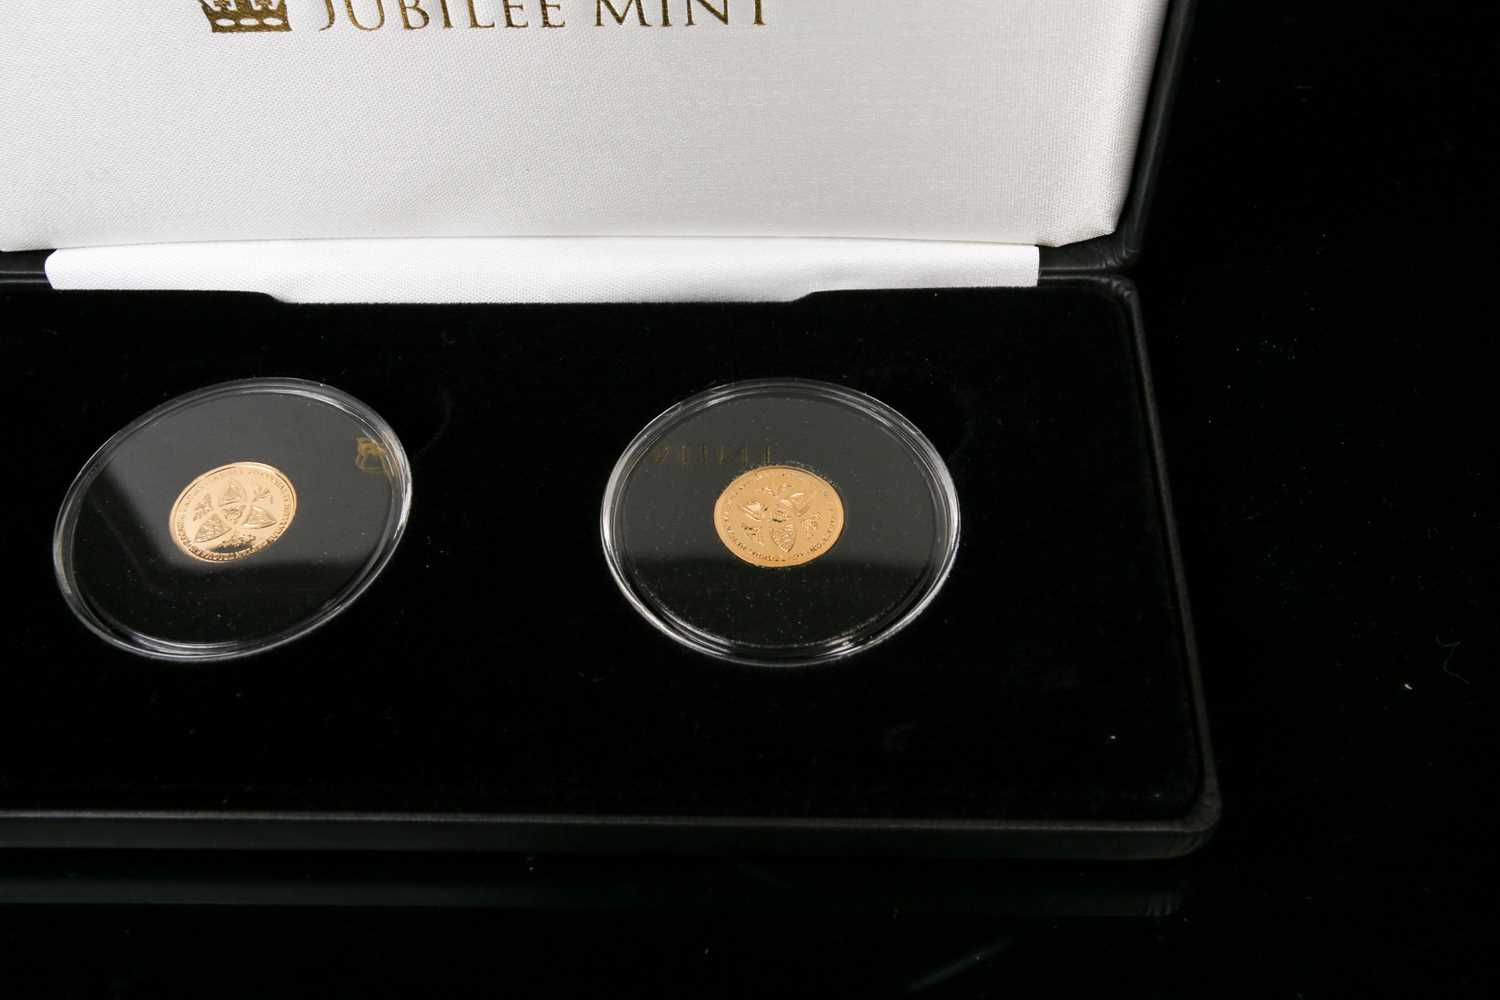 The Prince George & Princess Charlotte of Cambridge 9ct gold commemorative medallions, proof like - Image 2 of 5